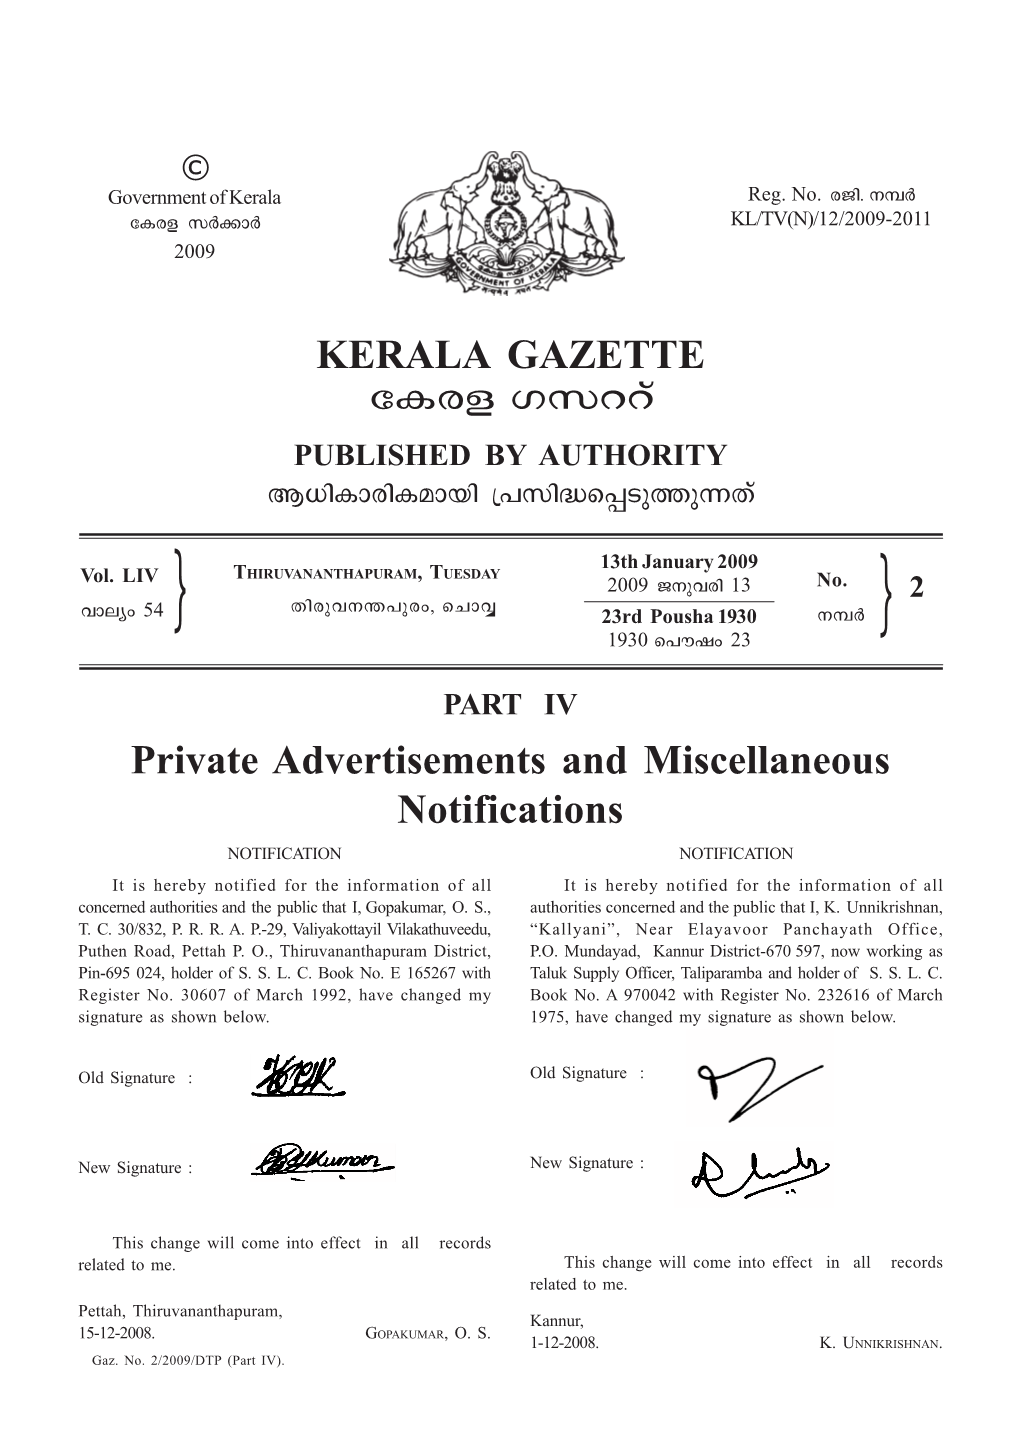 Private Advertisements and Miscellaneous Notifications